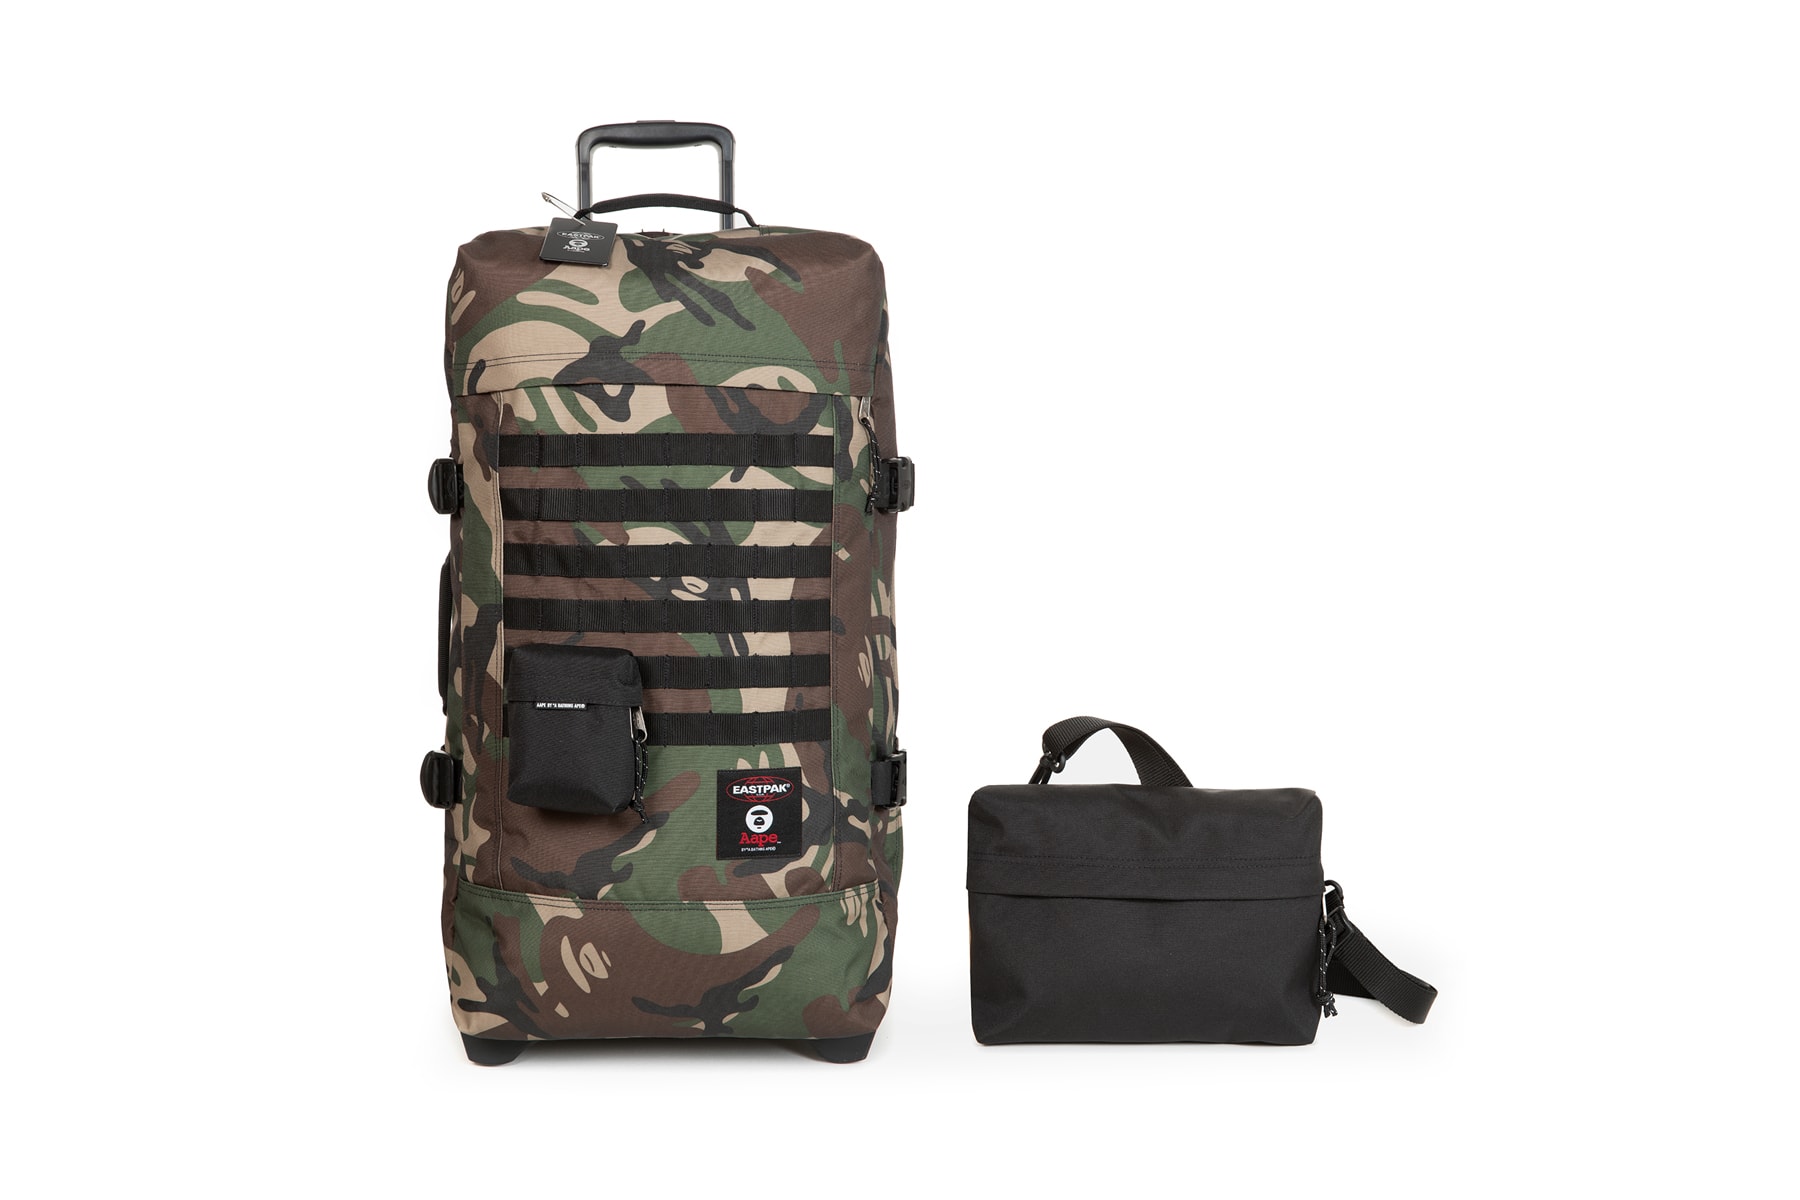 AAPE by A Bathing Ape x Eastpak Capsule bags accessories waist bags camo luggage black green carry all 